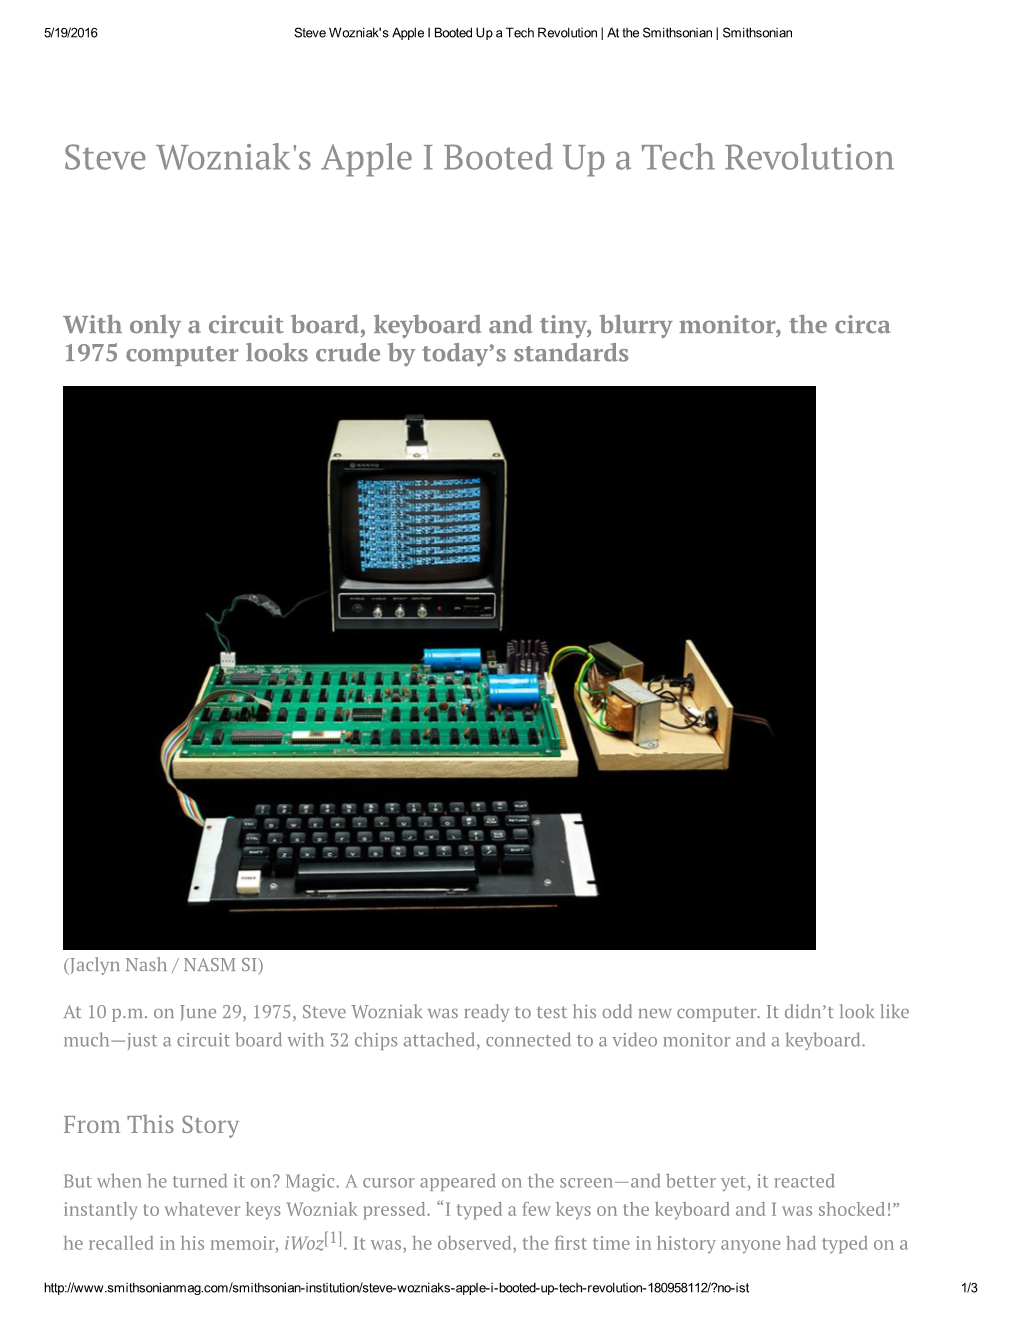 Steve Wozniak's Apple I Booted up a Tech Revolution | at the Smithsonian | Smithsonian